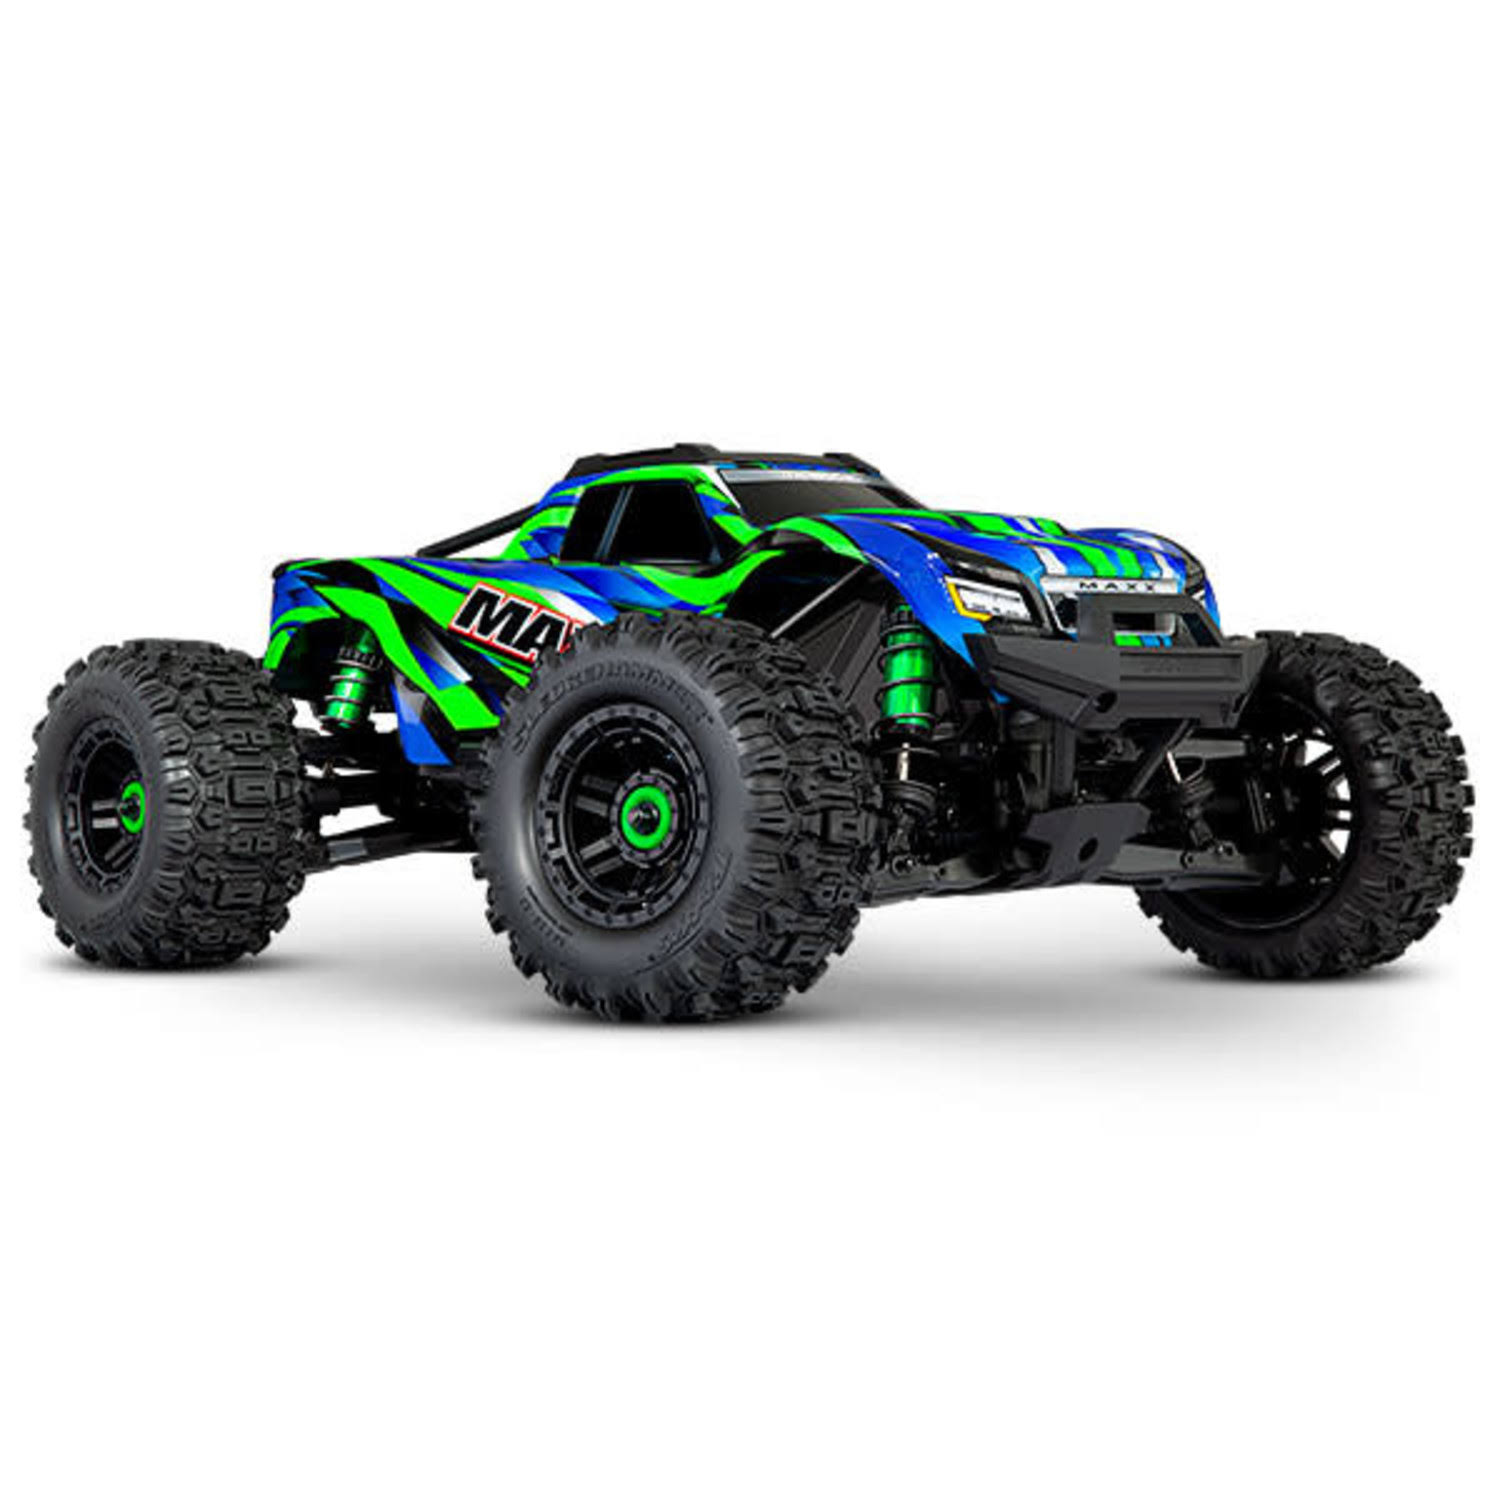 Traxxas Maxx 4S RTR Brushless 4x4 RC Monster Truck with WideMaxx Green